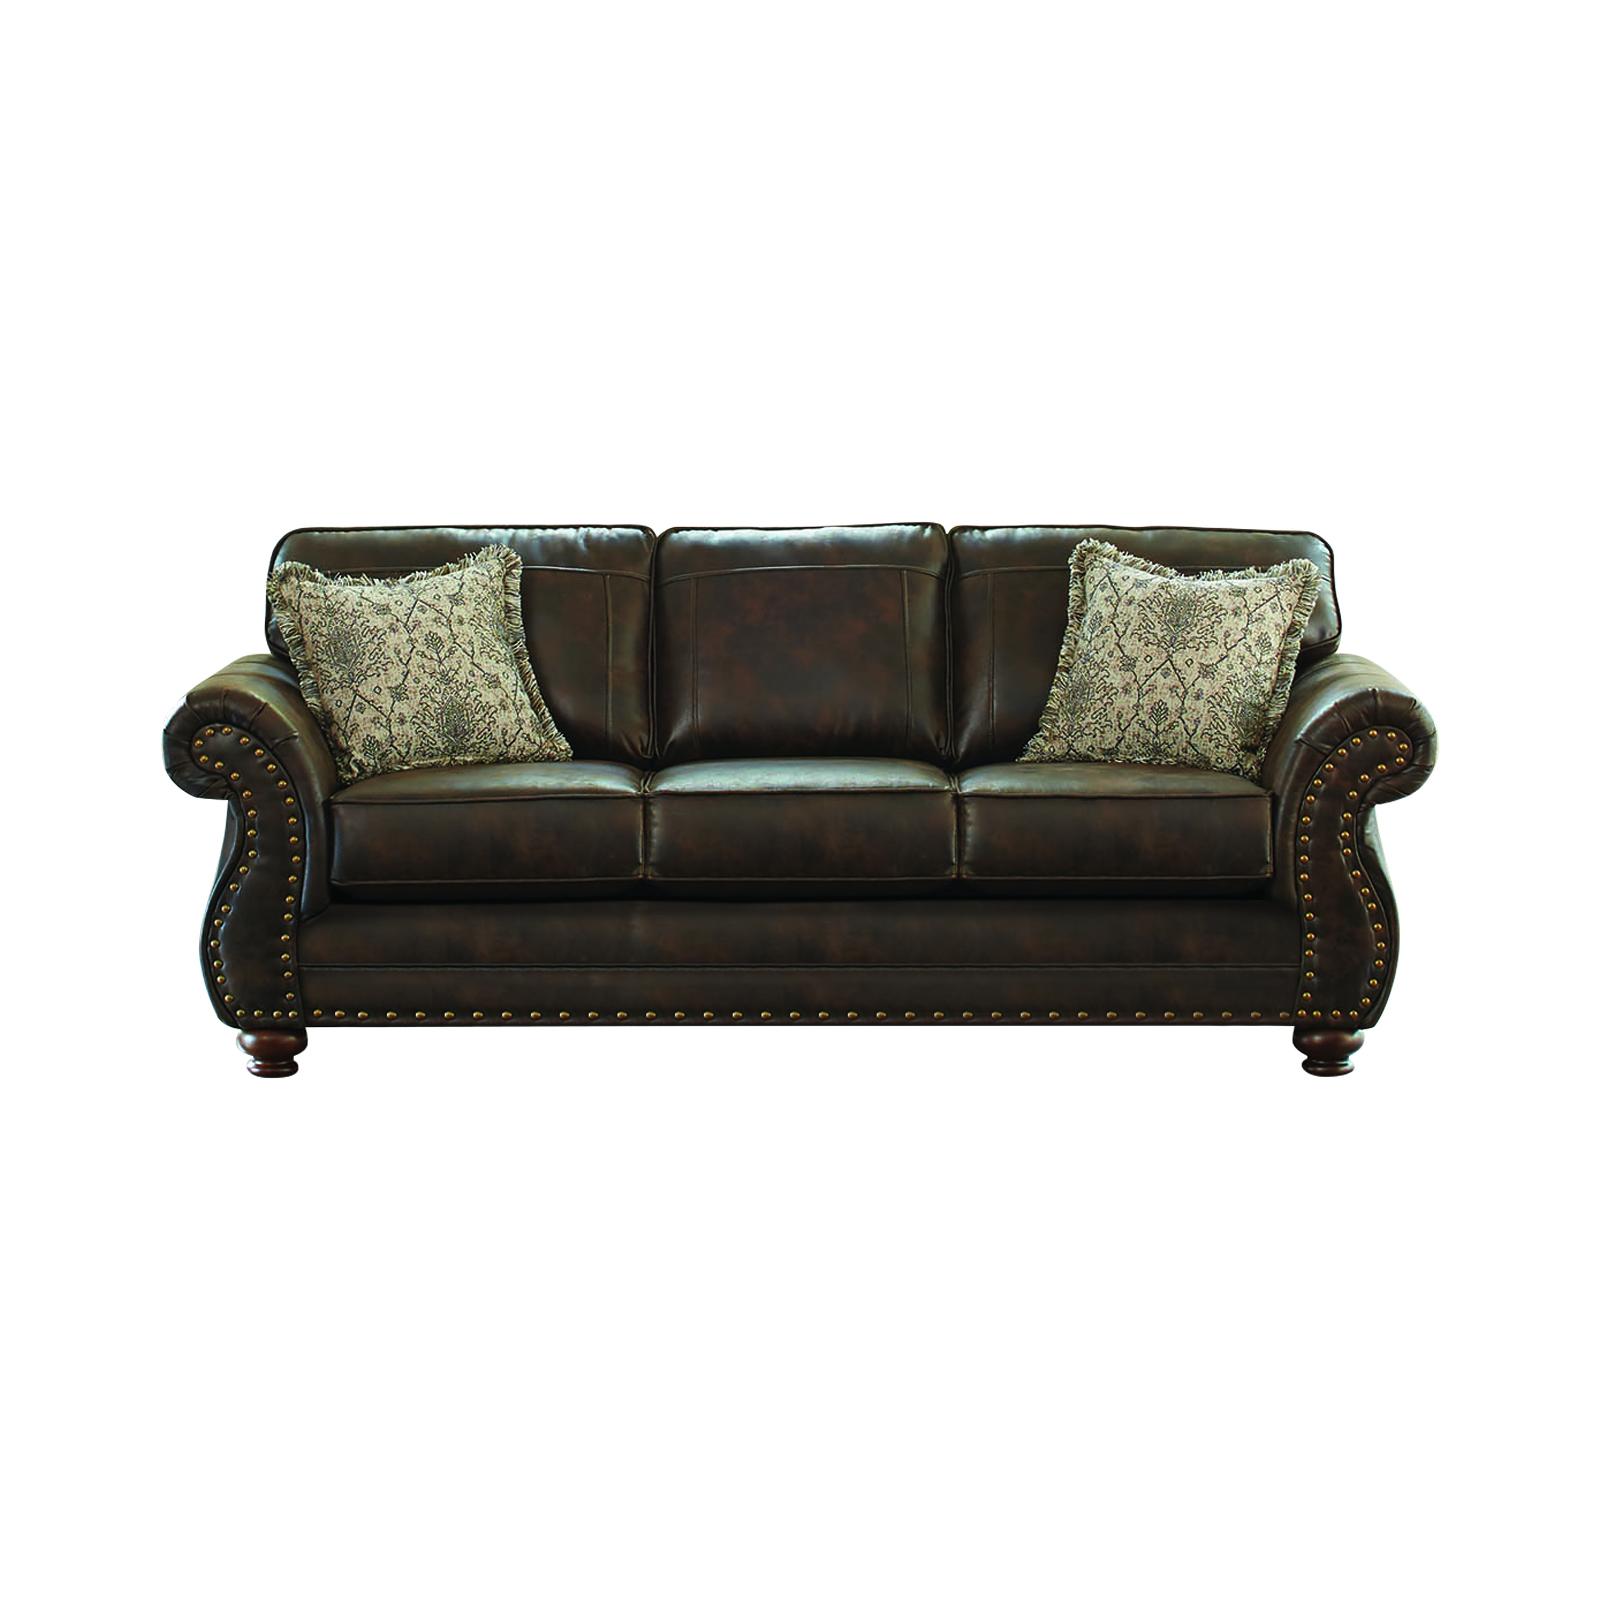 Traditional Sofa Graceville 508891 in Brown Leather